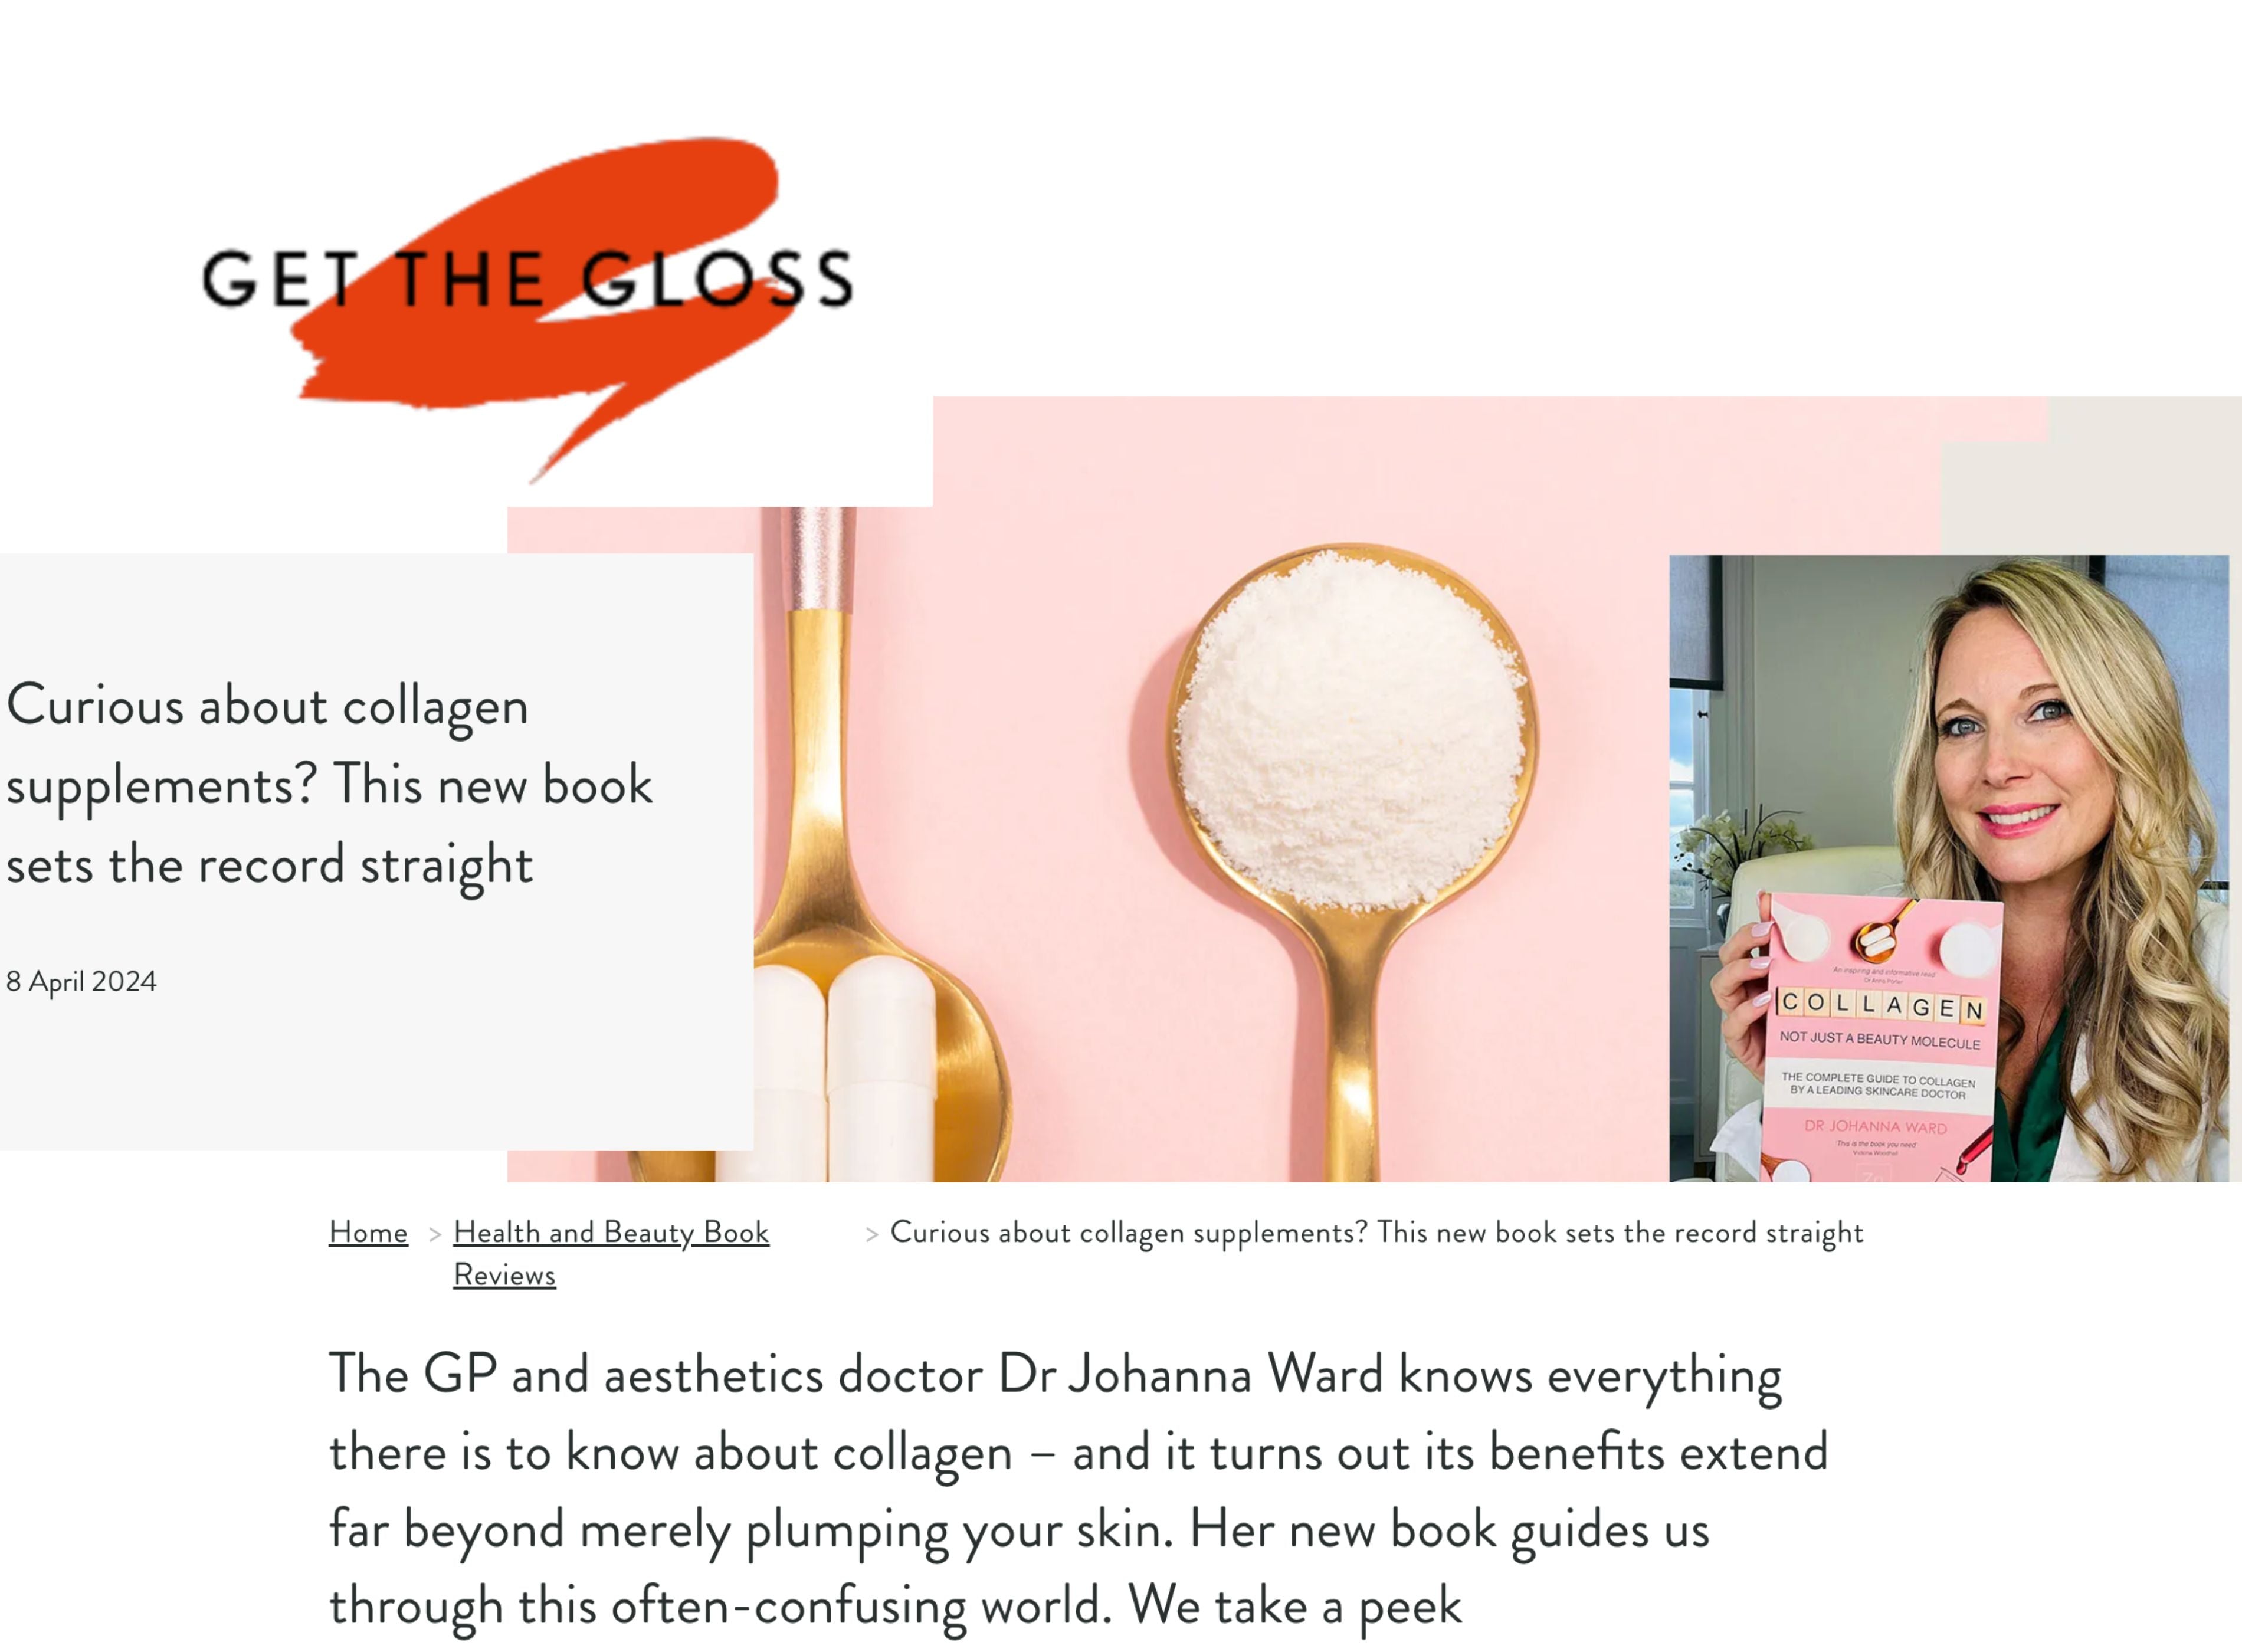 Get The Gloss: Collage - Not Just a Beauty Molecule